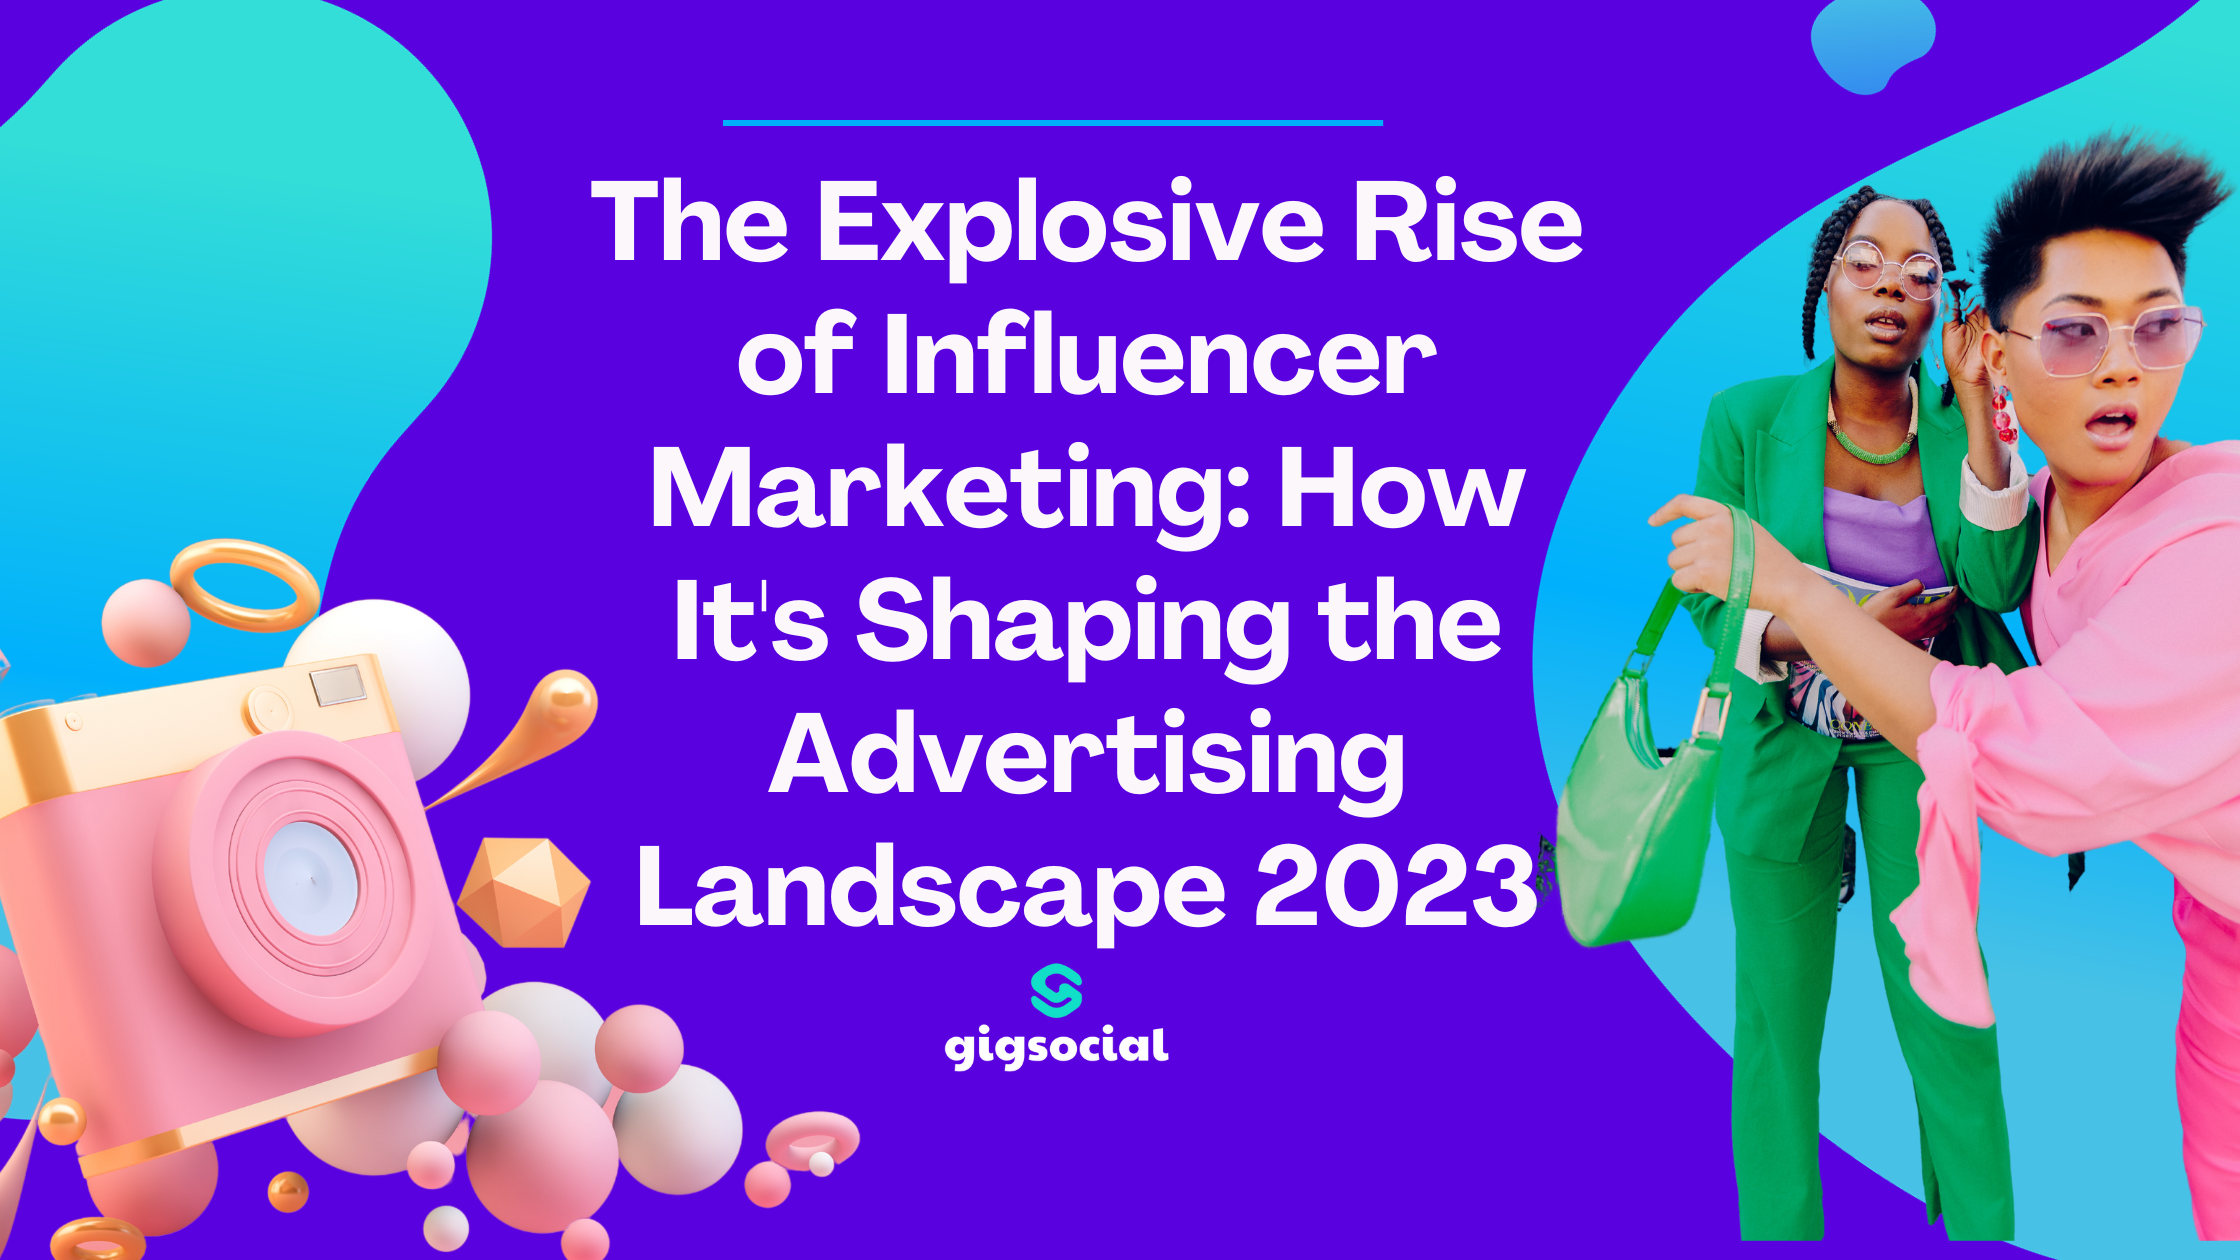 The Explosive Rise of Influencer Marketing: How It’s Shaping the Advertising Landscape 2023